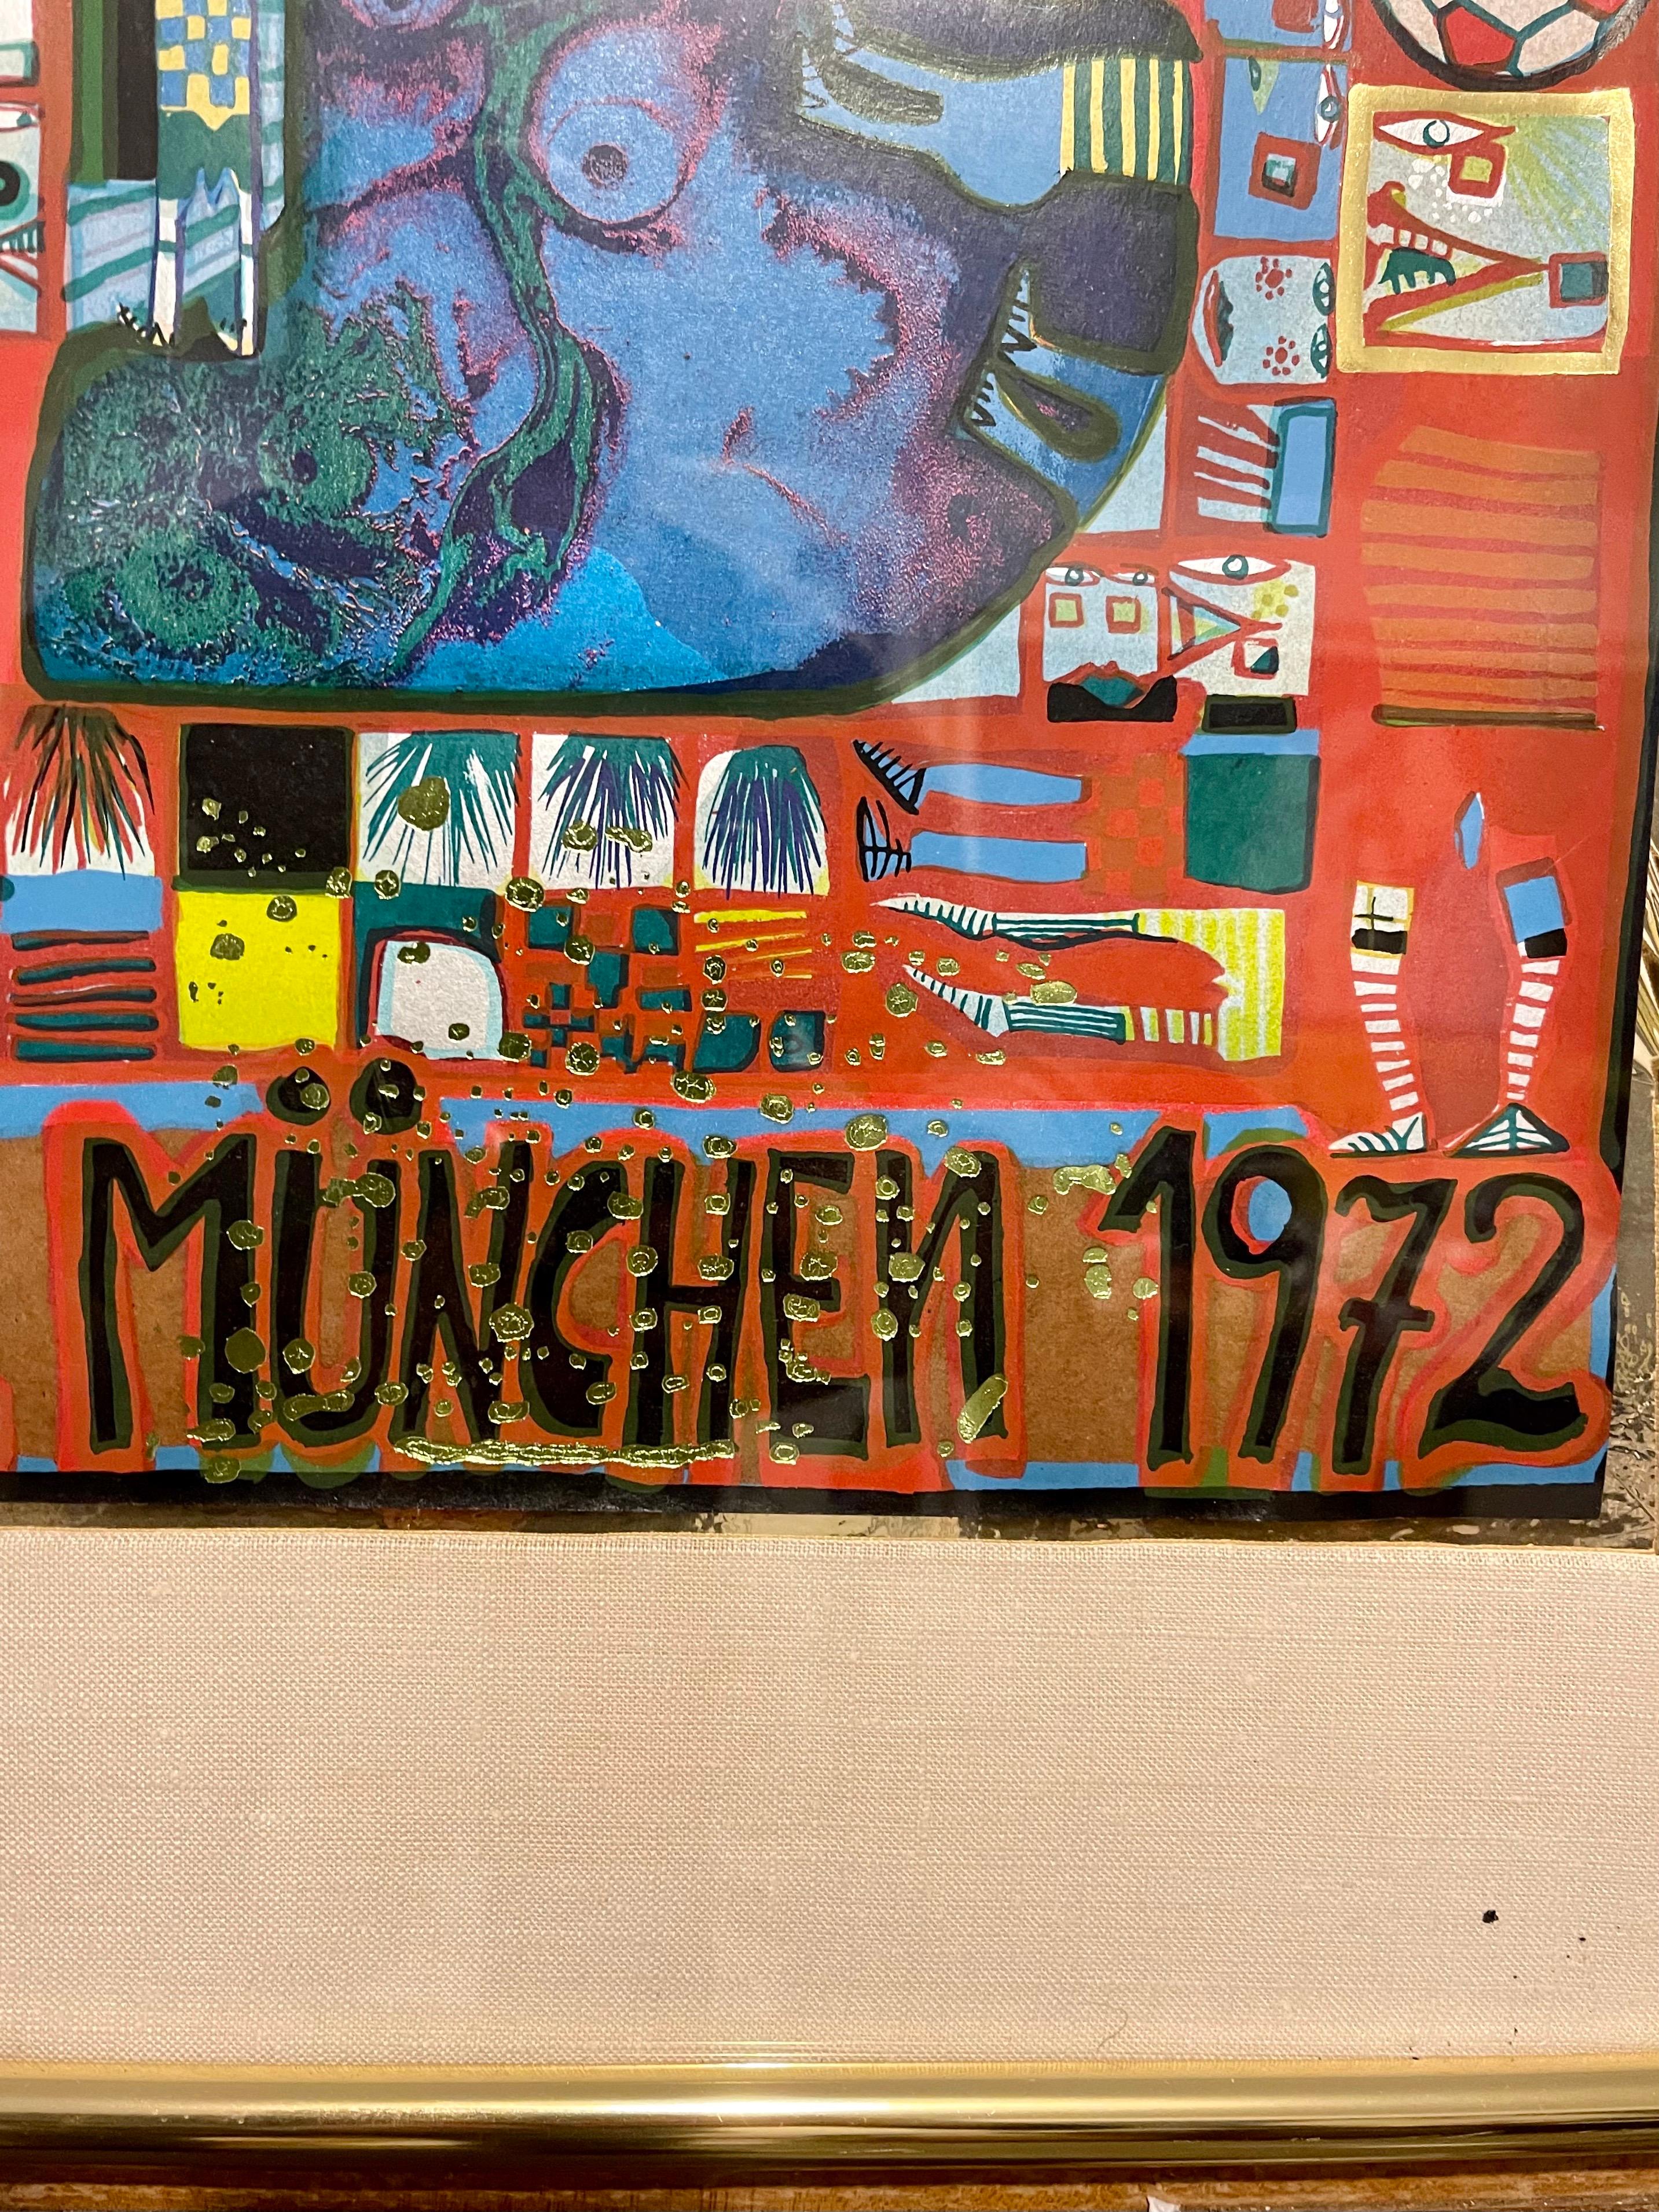 Original Hundertwasser Olympische Spiele Munchen 1972 Serigraph Numbered #2689/3999 Offered for sale is an original Friedensreich Hundertwasser Olympiade - Lithograph (Olympic Games Munich 1972) numbered stamped in the image 2689/3999 (lower left).